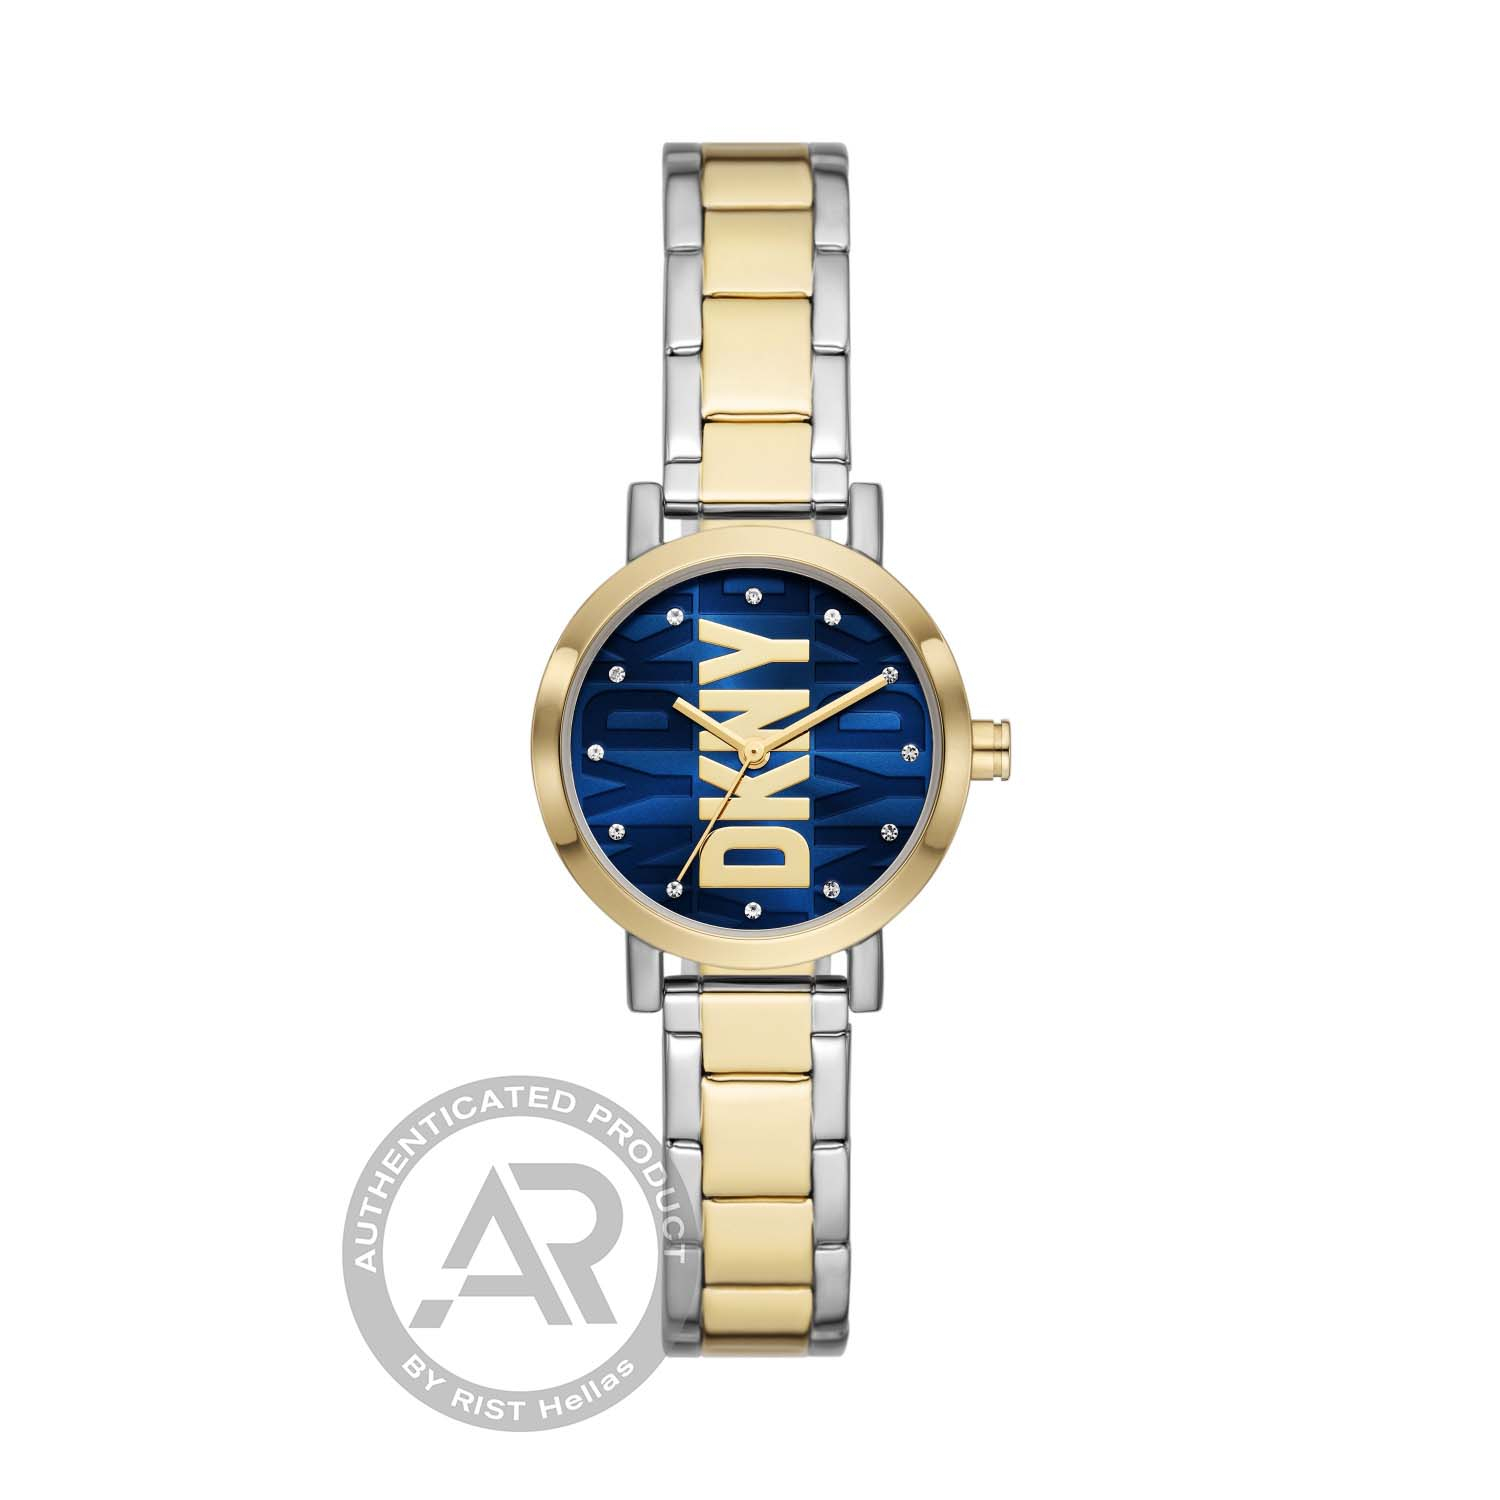 DKNY womens watch in two-tone stainless steel with blue dial and bracelet.